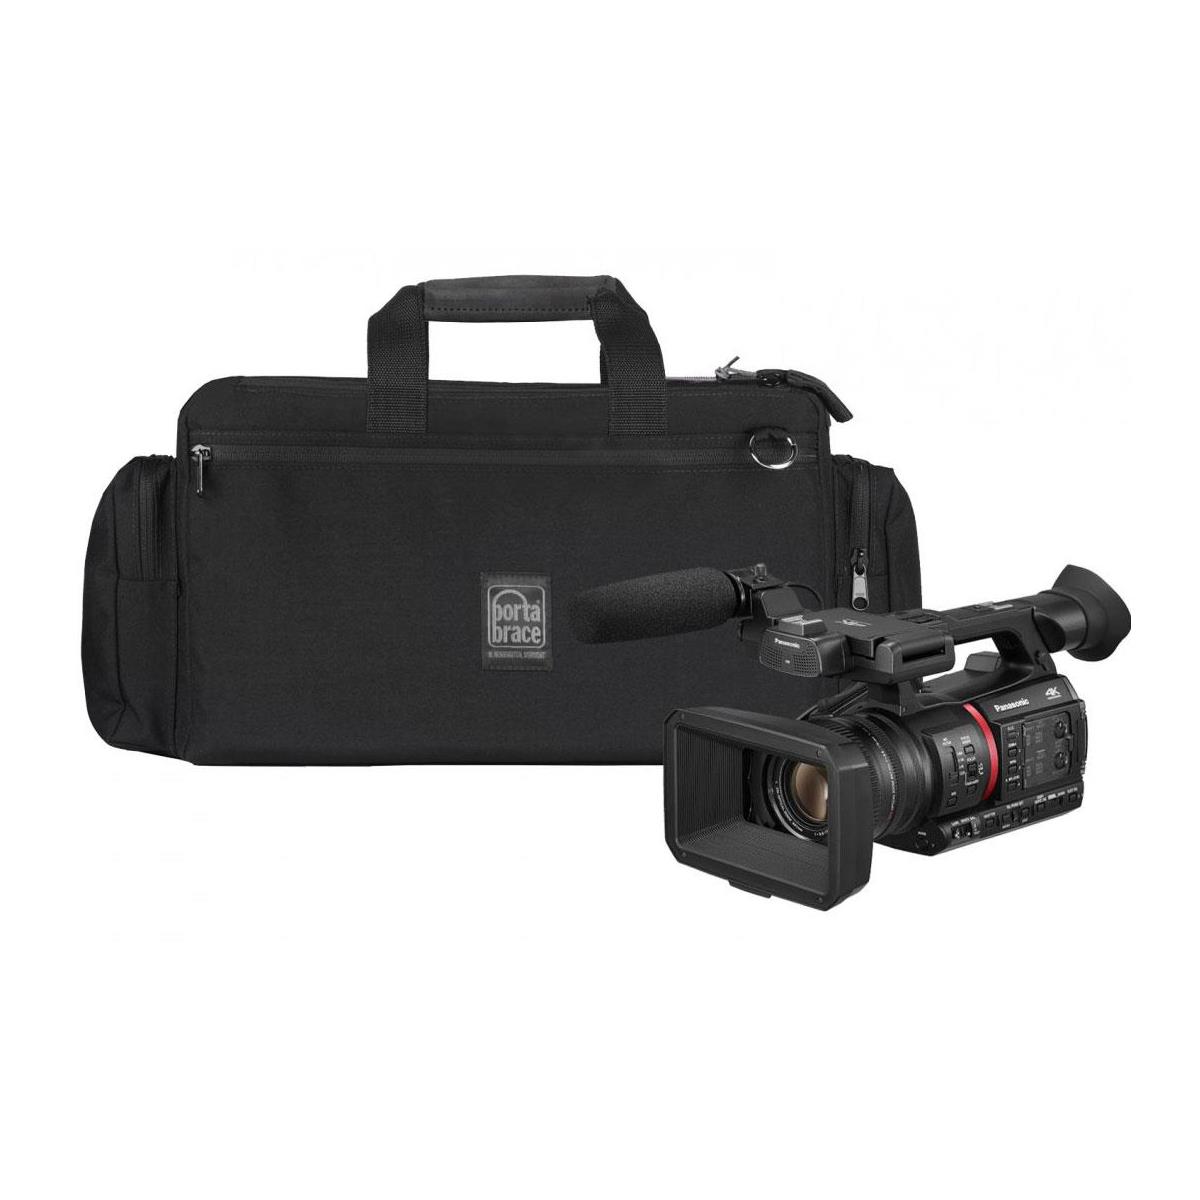 

Porta Brace Ultra-Lightweight Carrying Case for Panasonic AG-CX350 Camcorder